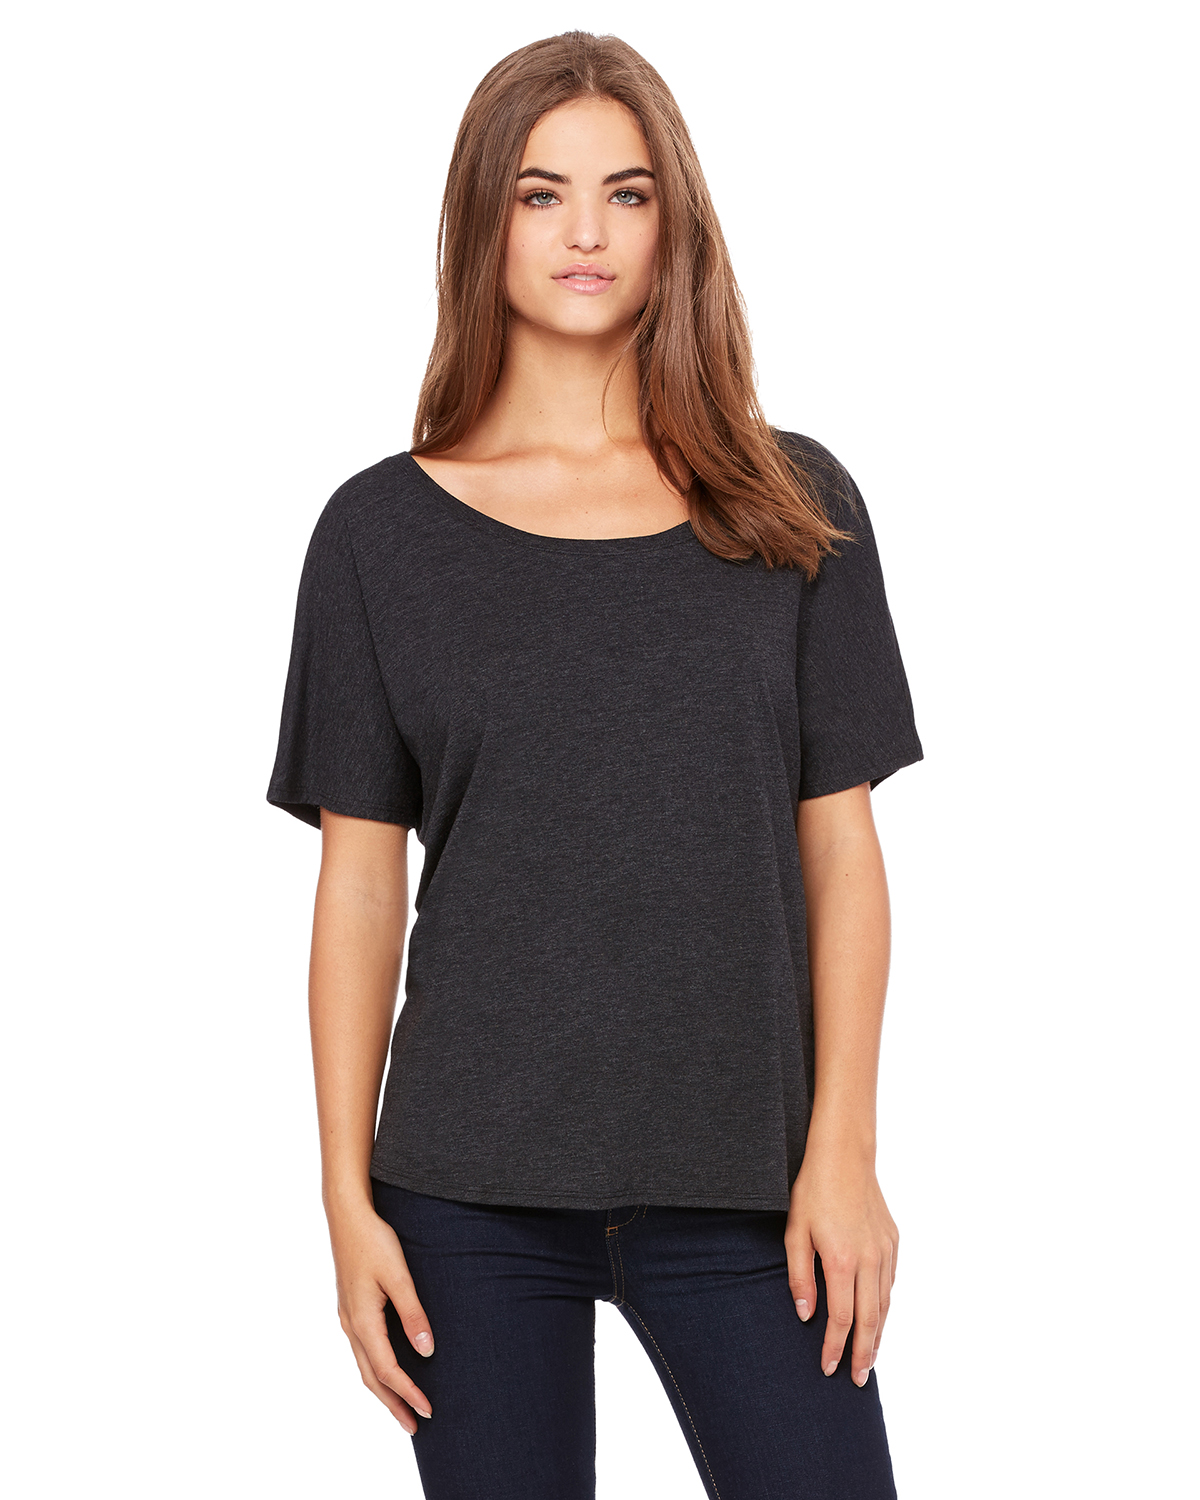 Discovery silence Snack Bella + Canvas 8816 | Women's Slouchy T-Shirt | ShirtSpace